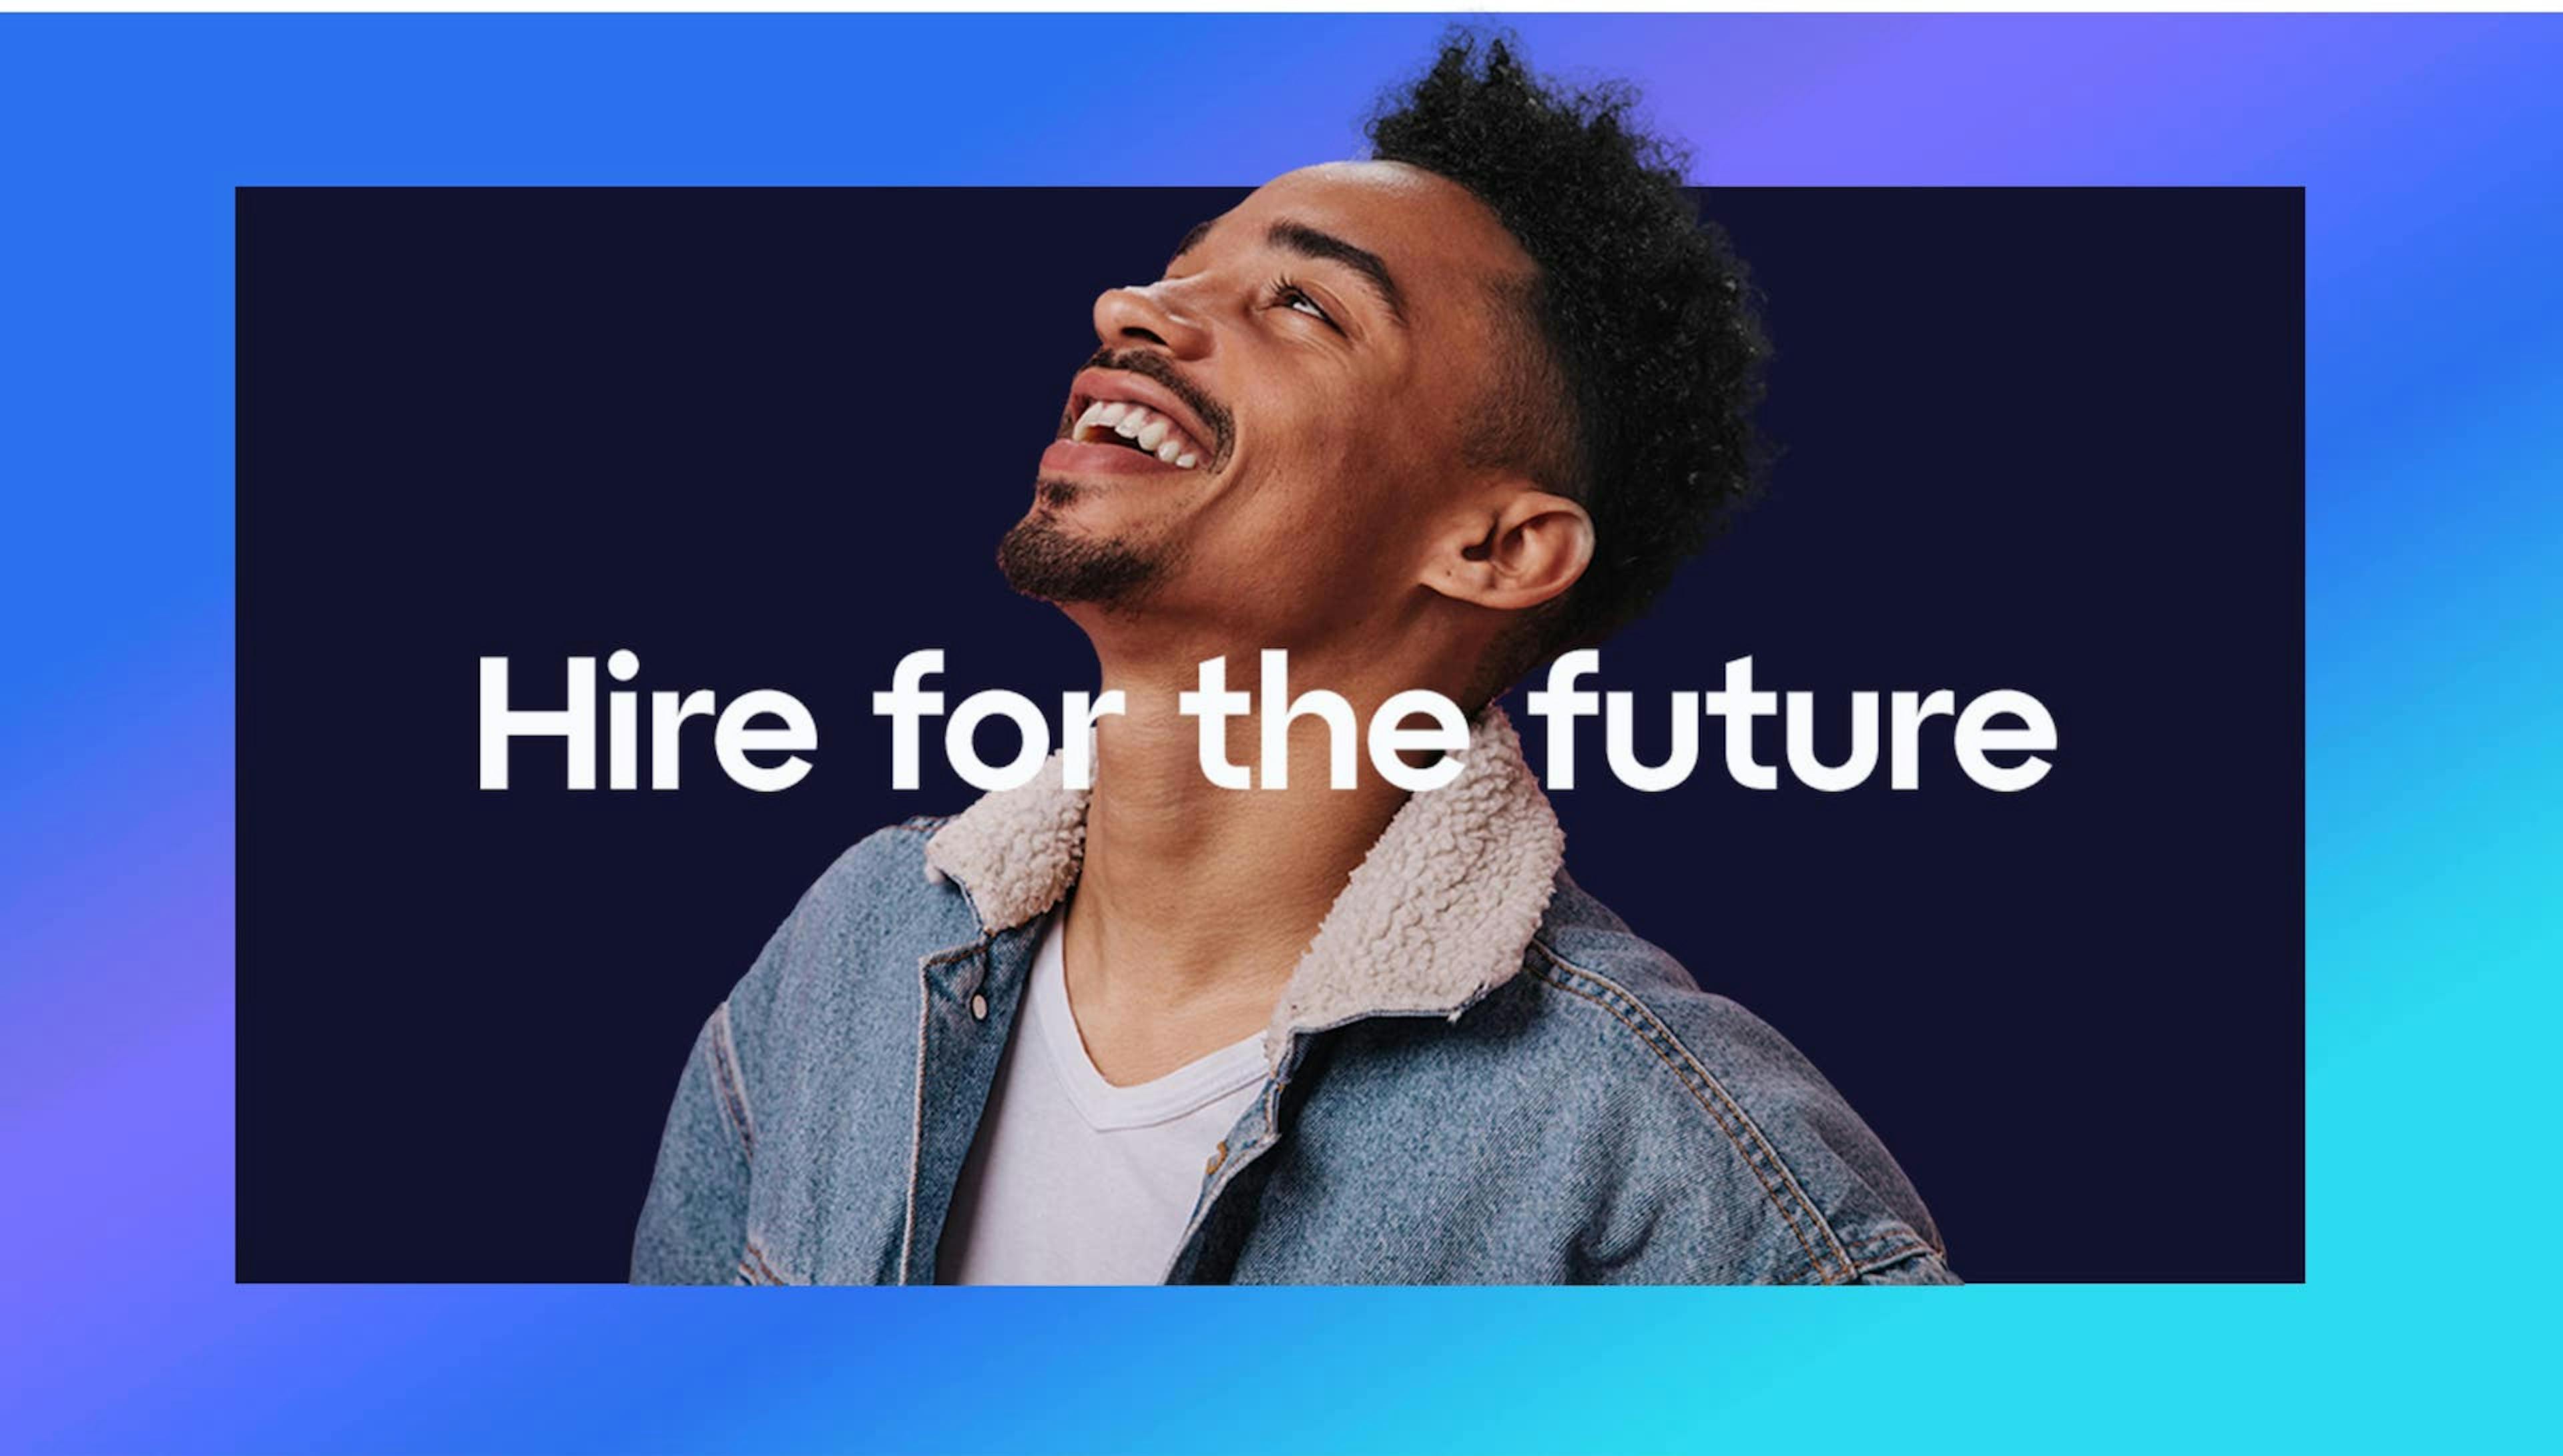 A man in a denim jacket with the slogan "Hire for the future" for Catapult Solutions Group.